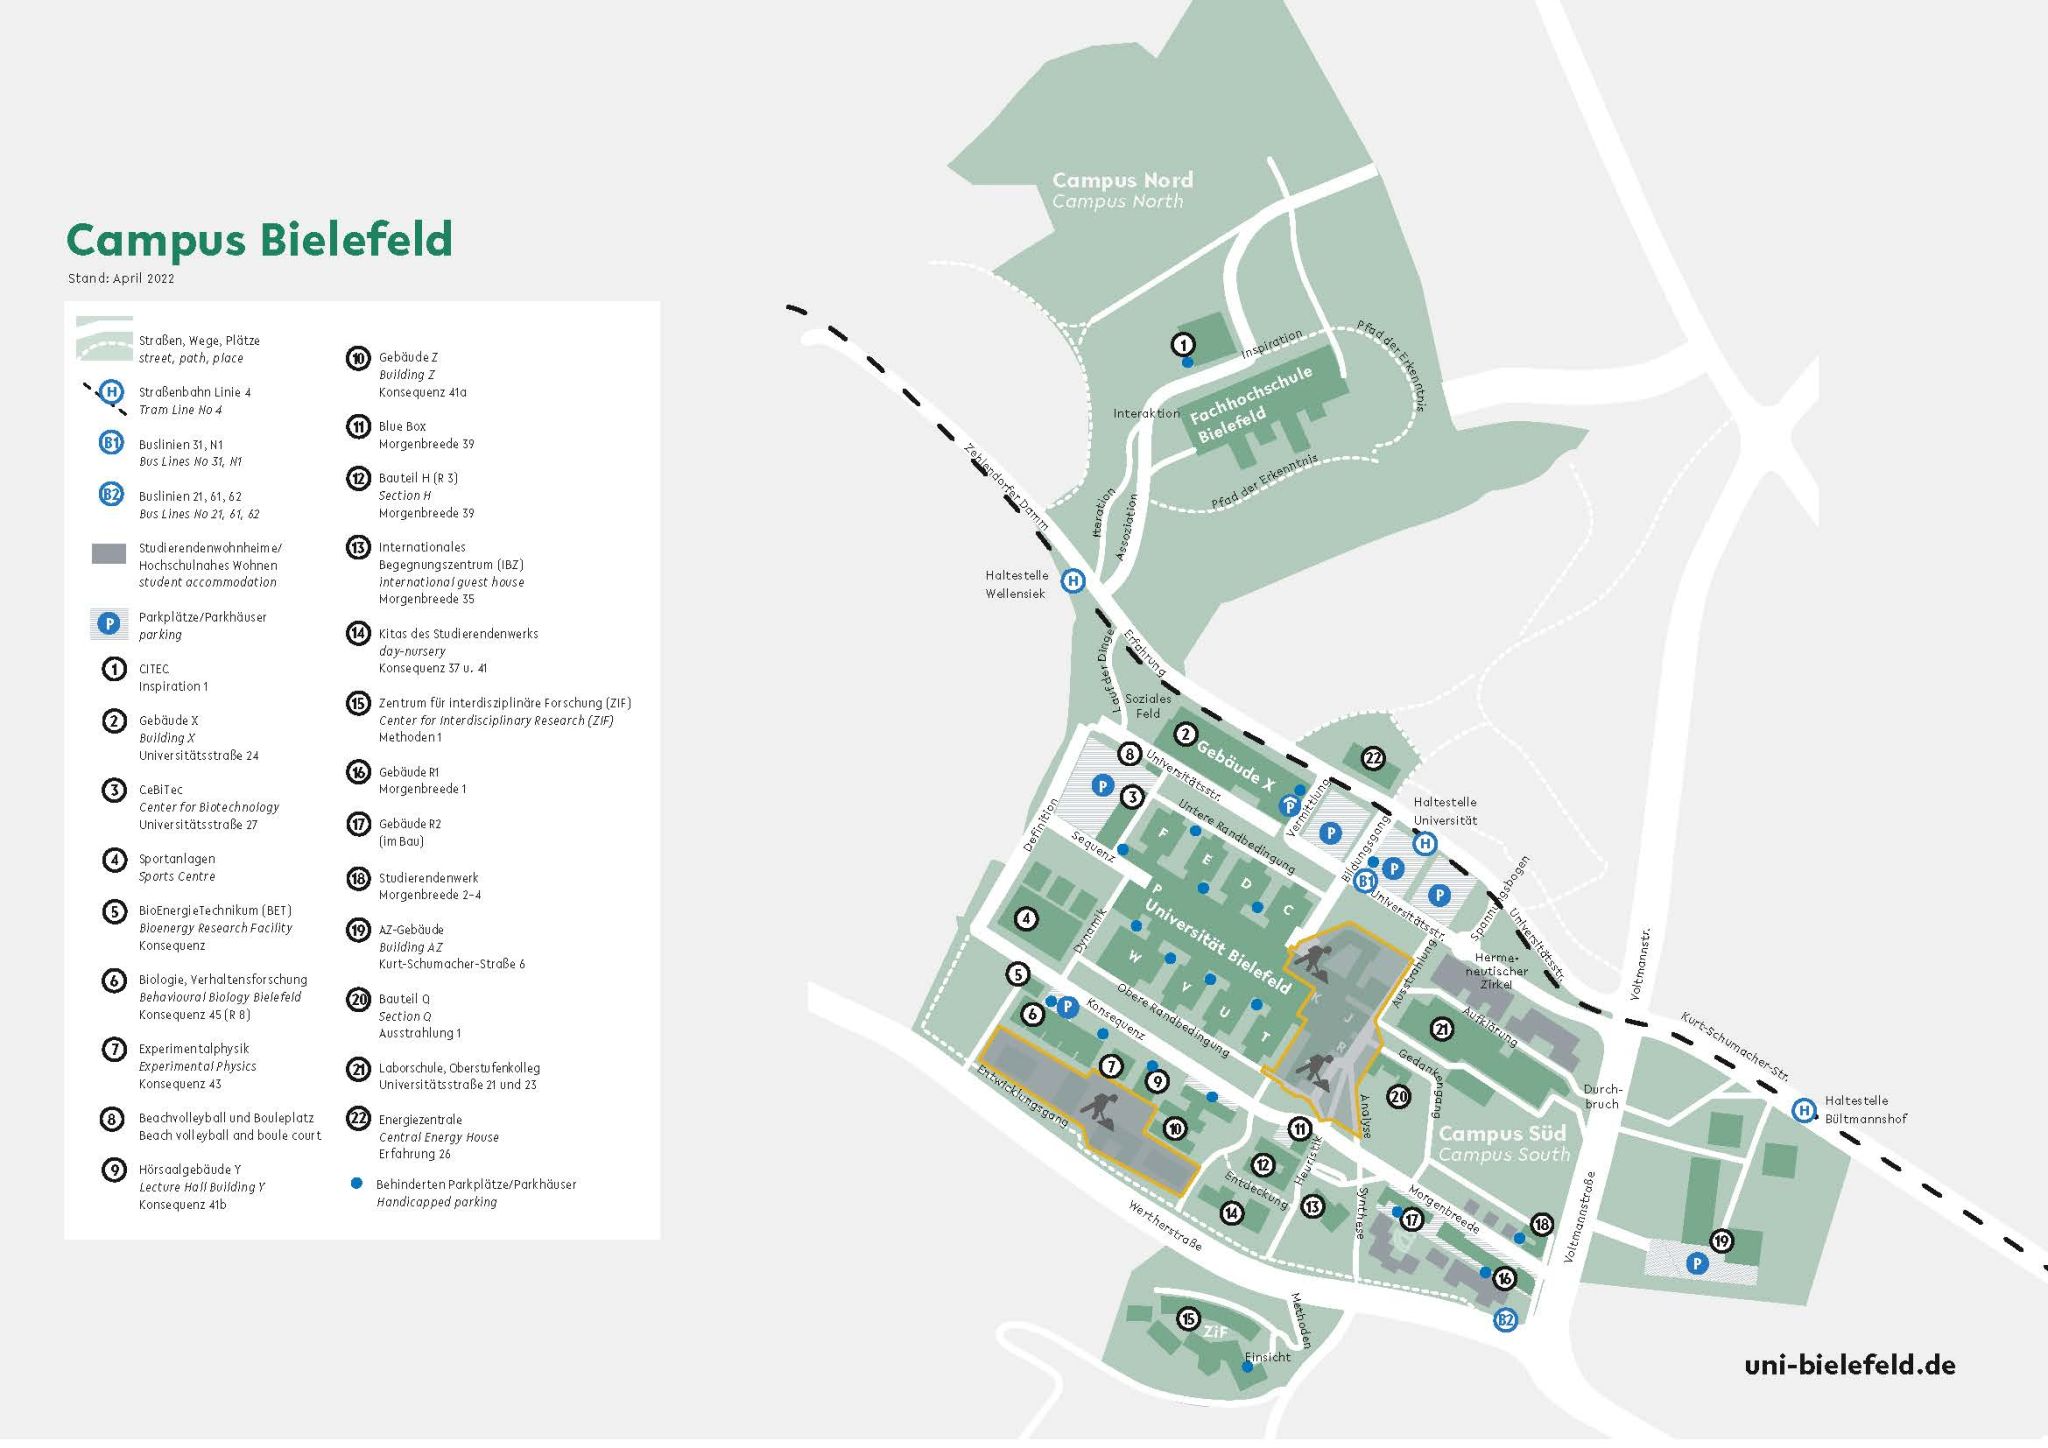 Campus map with disabled parking spaces/parking garages